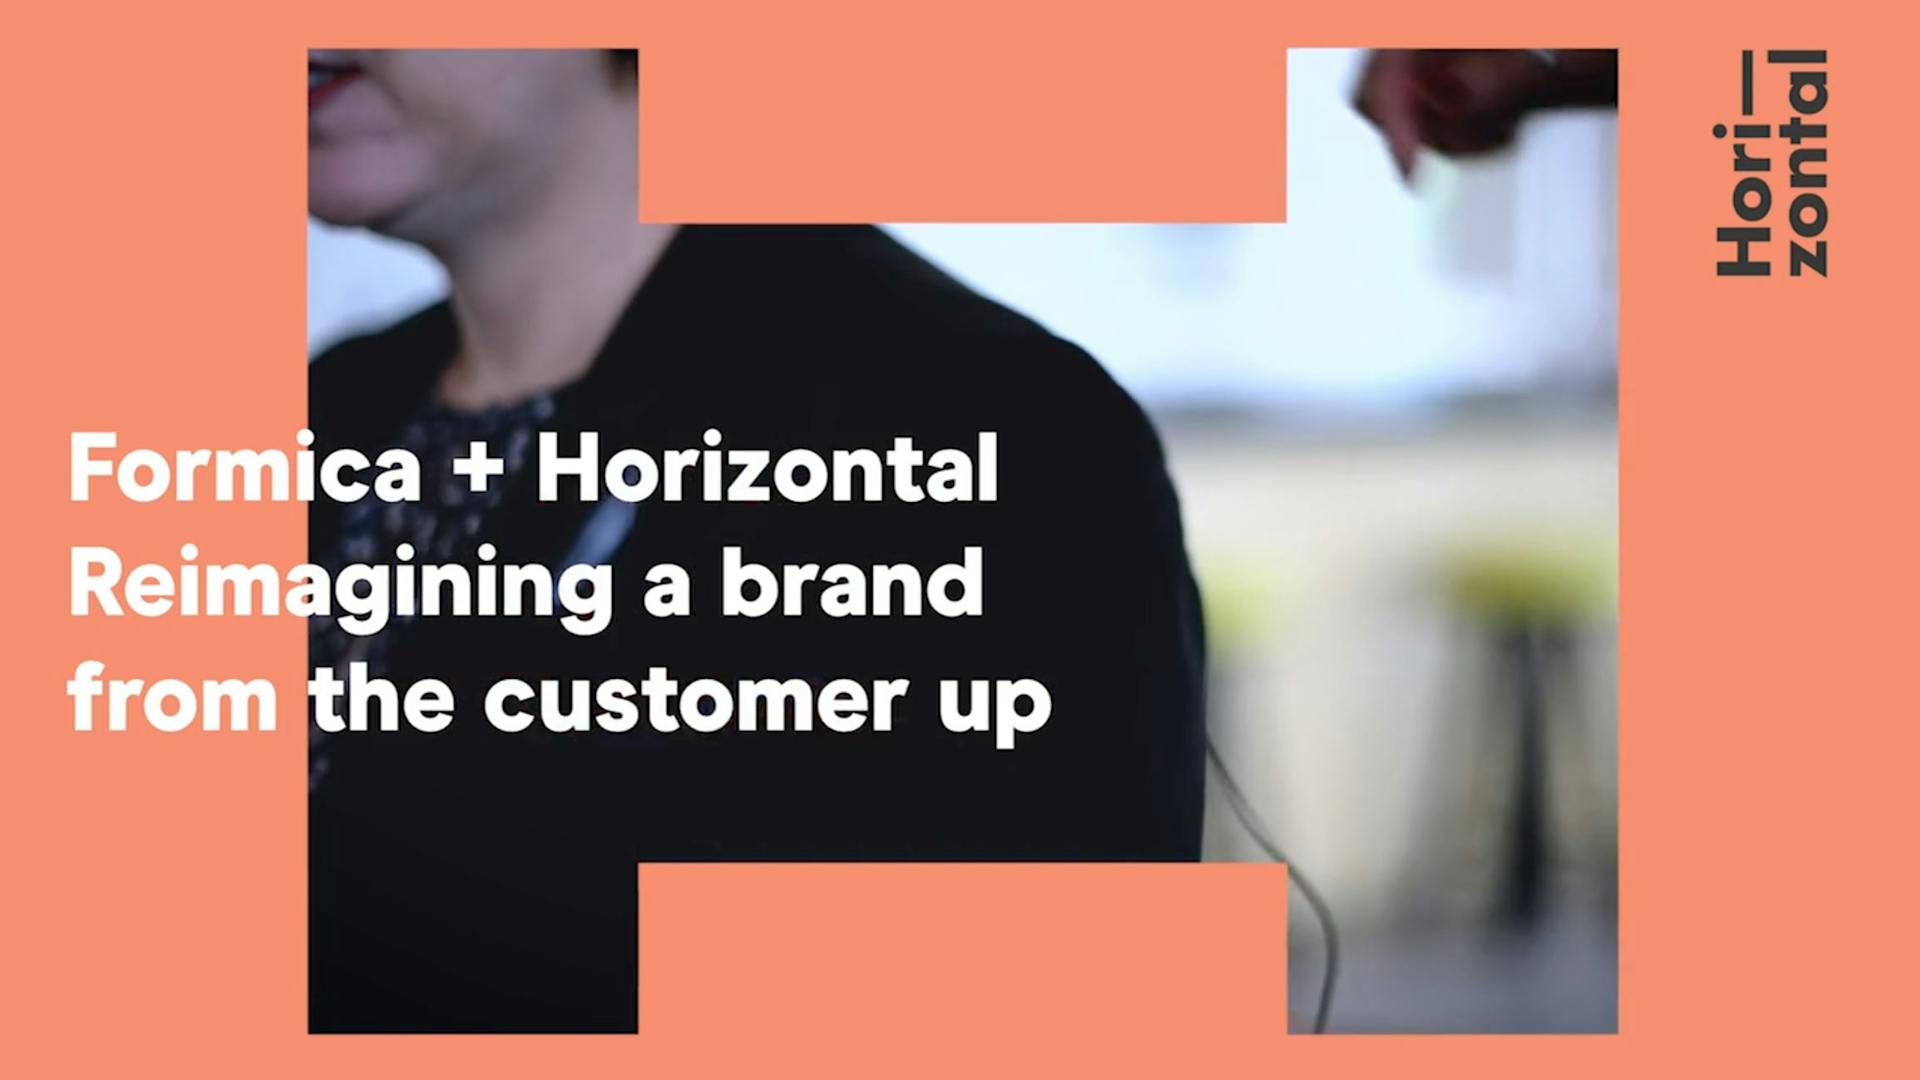 Formica + Horizontal Reimagining a brand from the customer up